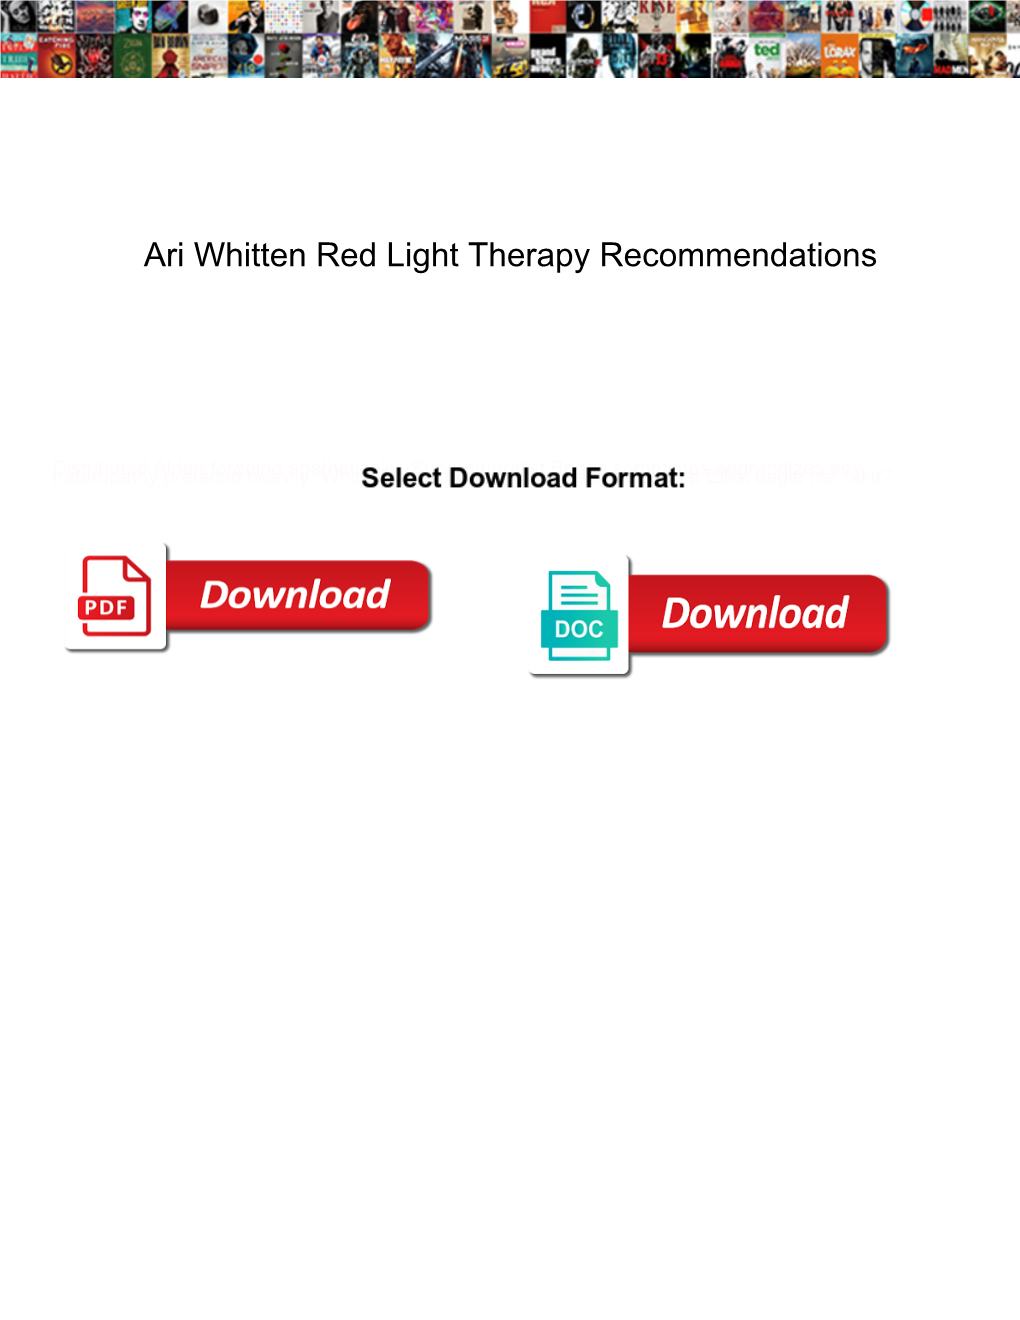 Ari Whitten Red Light Therapy Recommendations